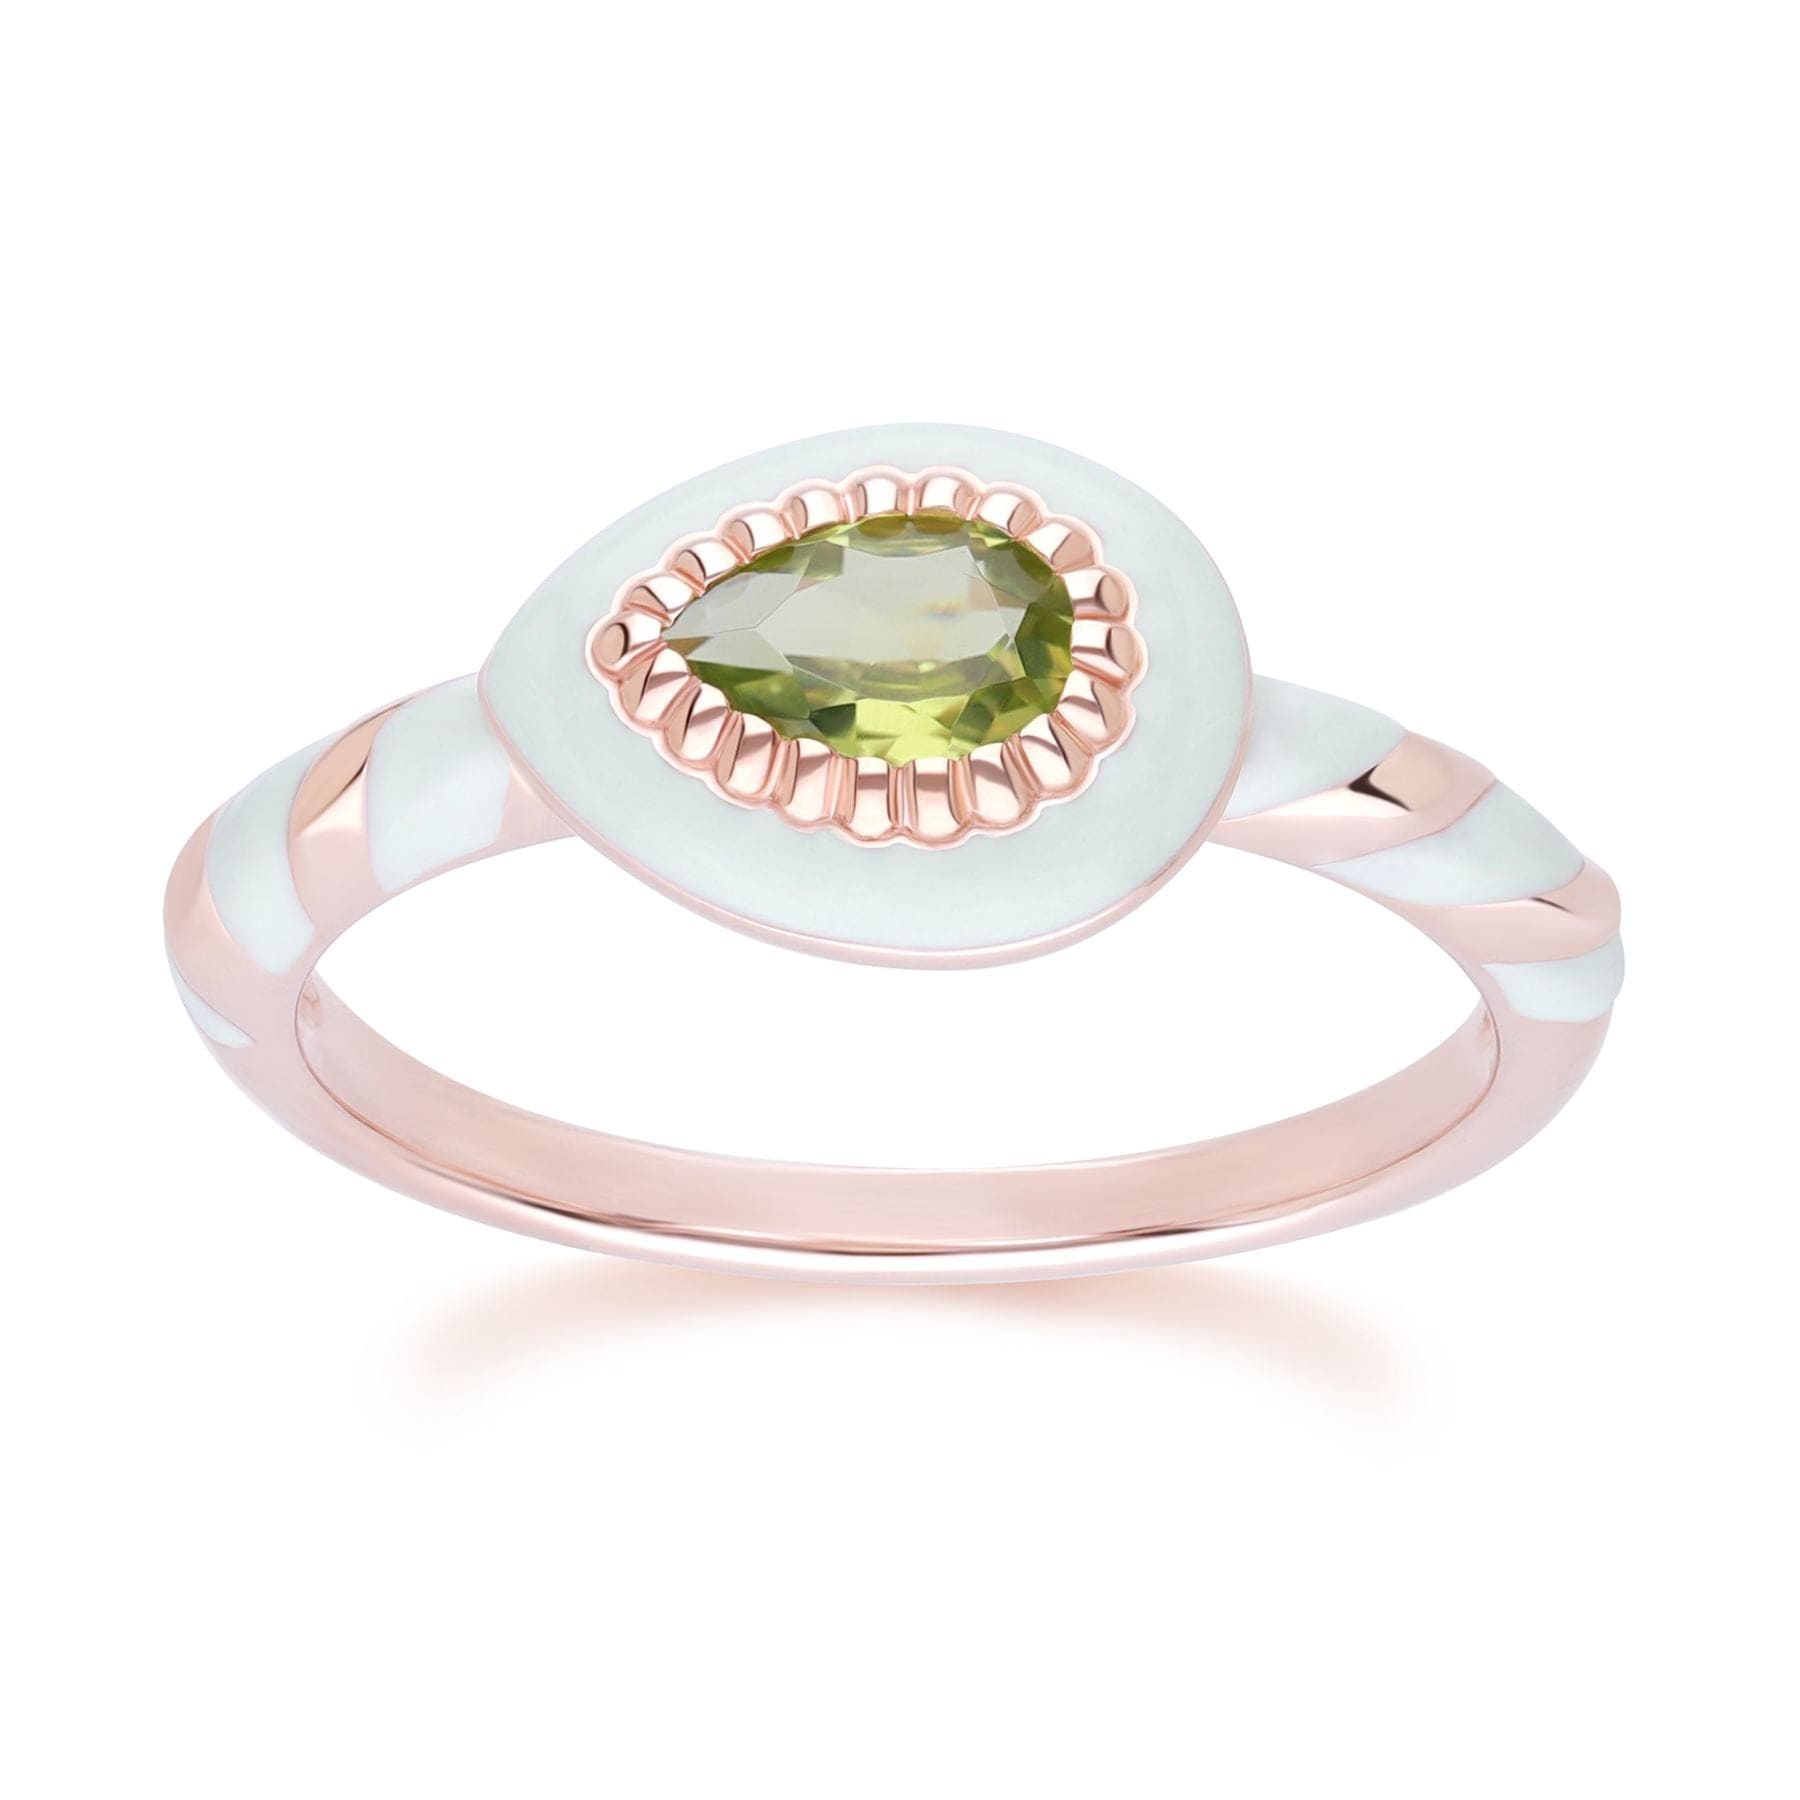 253R710601925 Siberian Waltz Green Enamel & Peridot Ring In 18ct Rose Gold Plated Sterling Silver Front